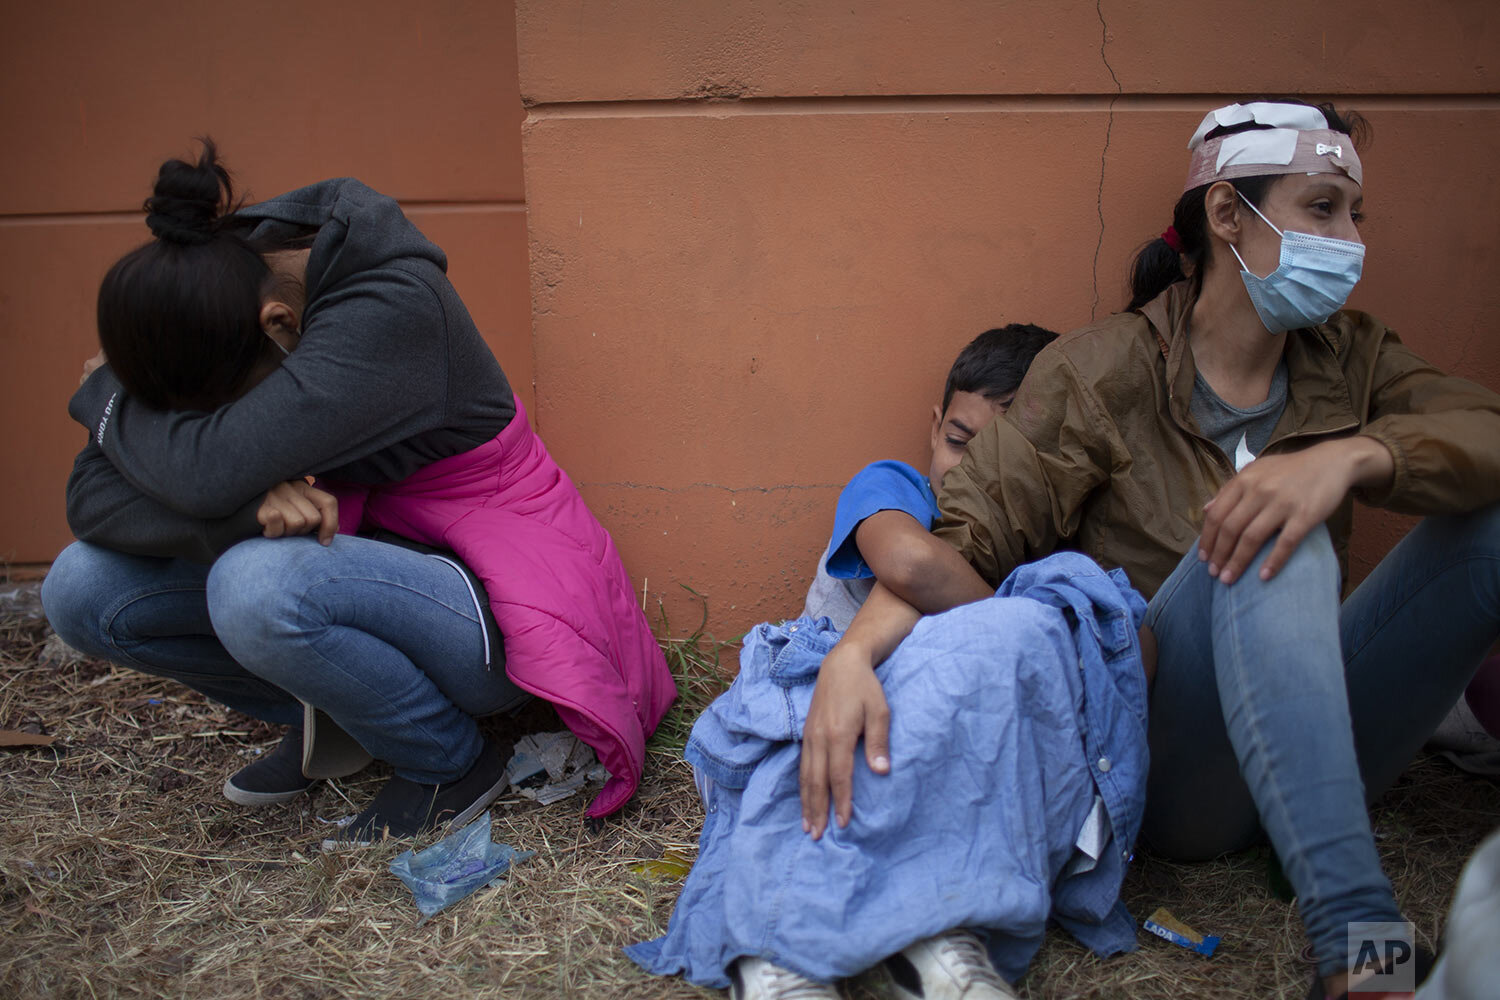  Injured Honduran migrant women with children cry on the side of a highway after clashing with Guatemalan security forces in Vado Hondo, Guatemala, Sunday, Jan. 17, 2021, as they try to reach the U.S. by foot. (AP Photo/Sandra Sebastian) 